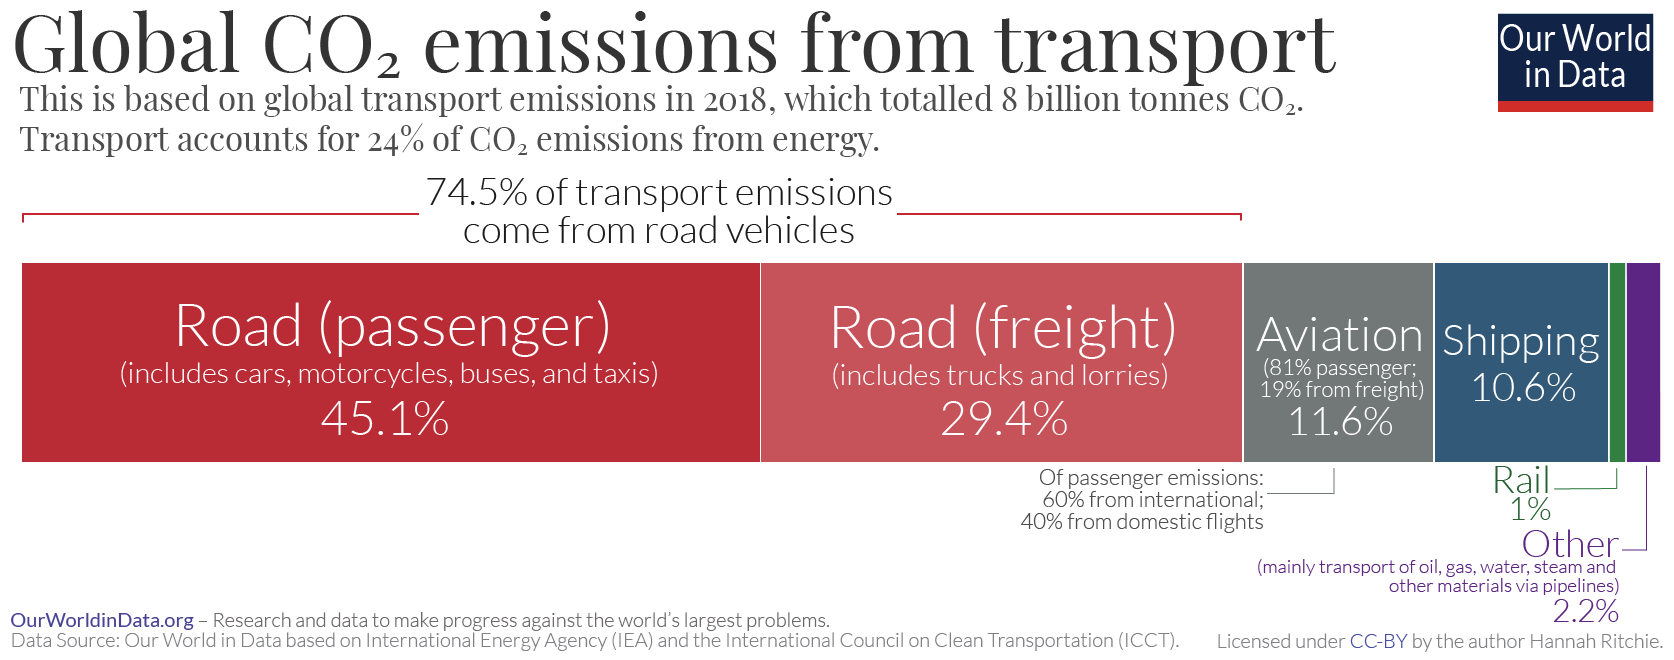 Cars, planes, trains: where do CO2 emissions from transport come from?